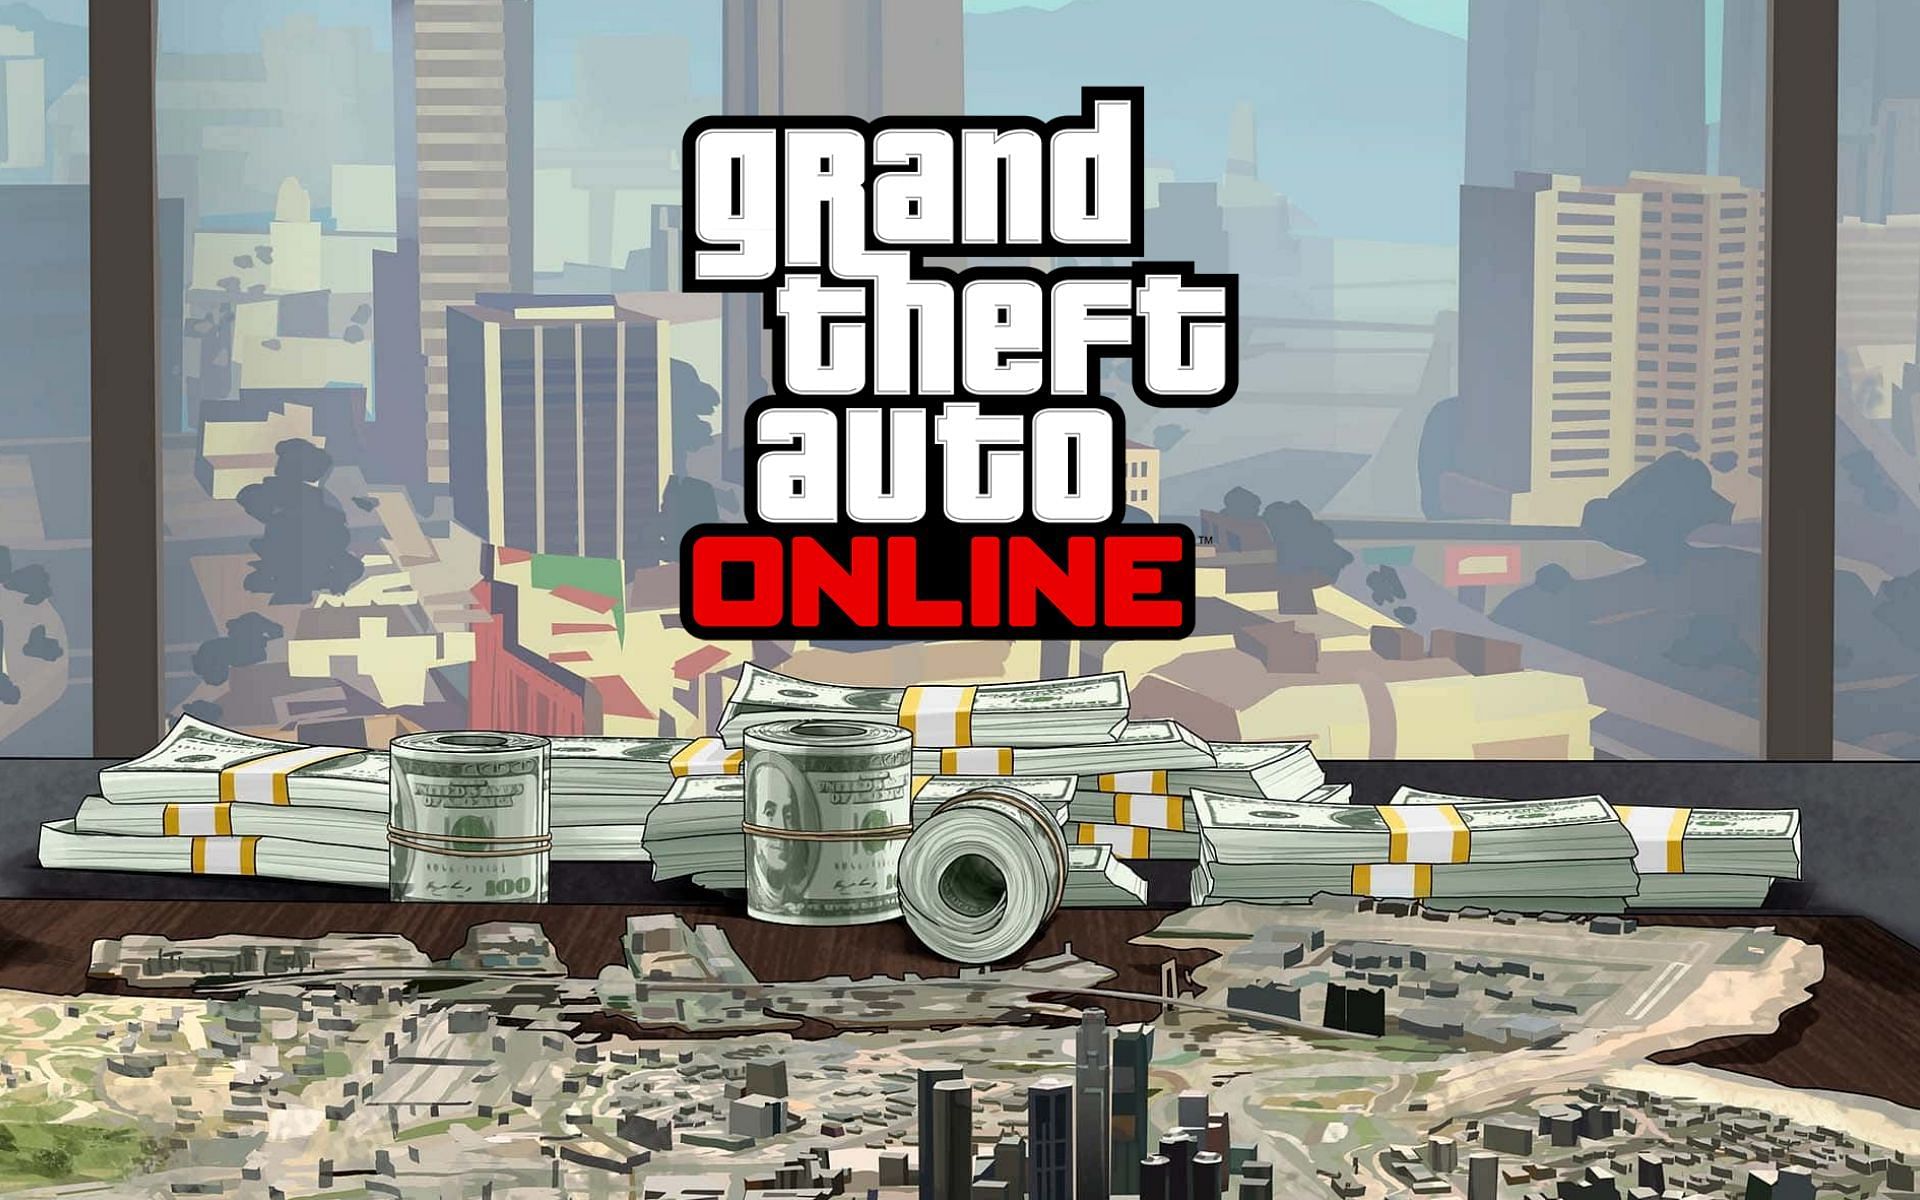 GTA Online glitches are everywhere if the player knows where to look (Image via Rockstar Games)